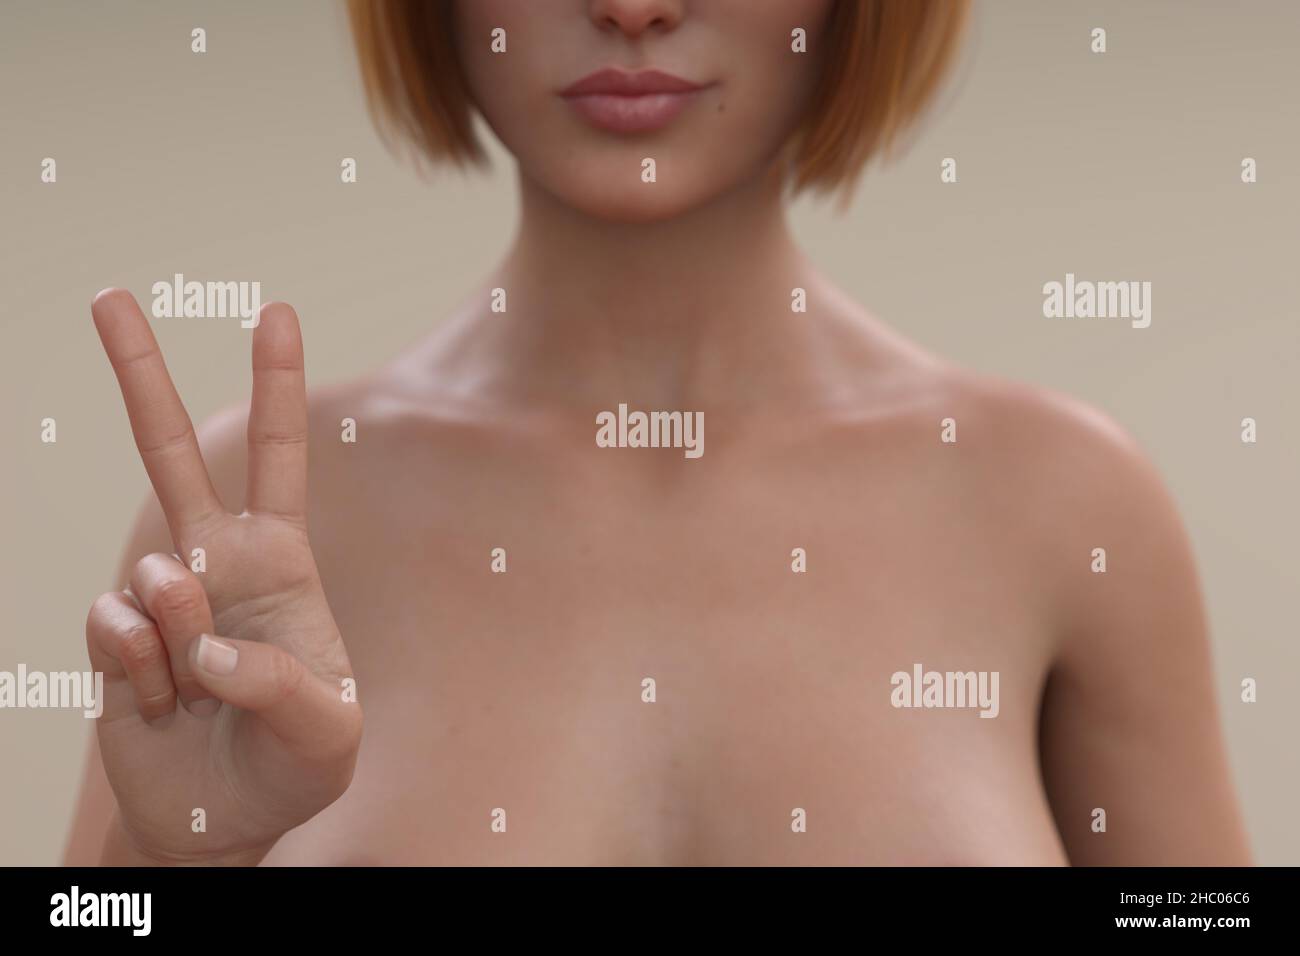 Sexy nude virtual female model with red hair showing peace gesture at viewer, 3D render Stock Photo